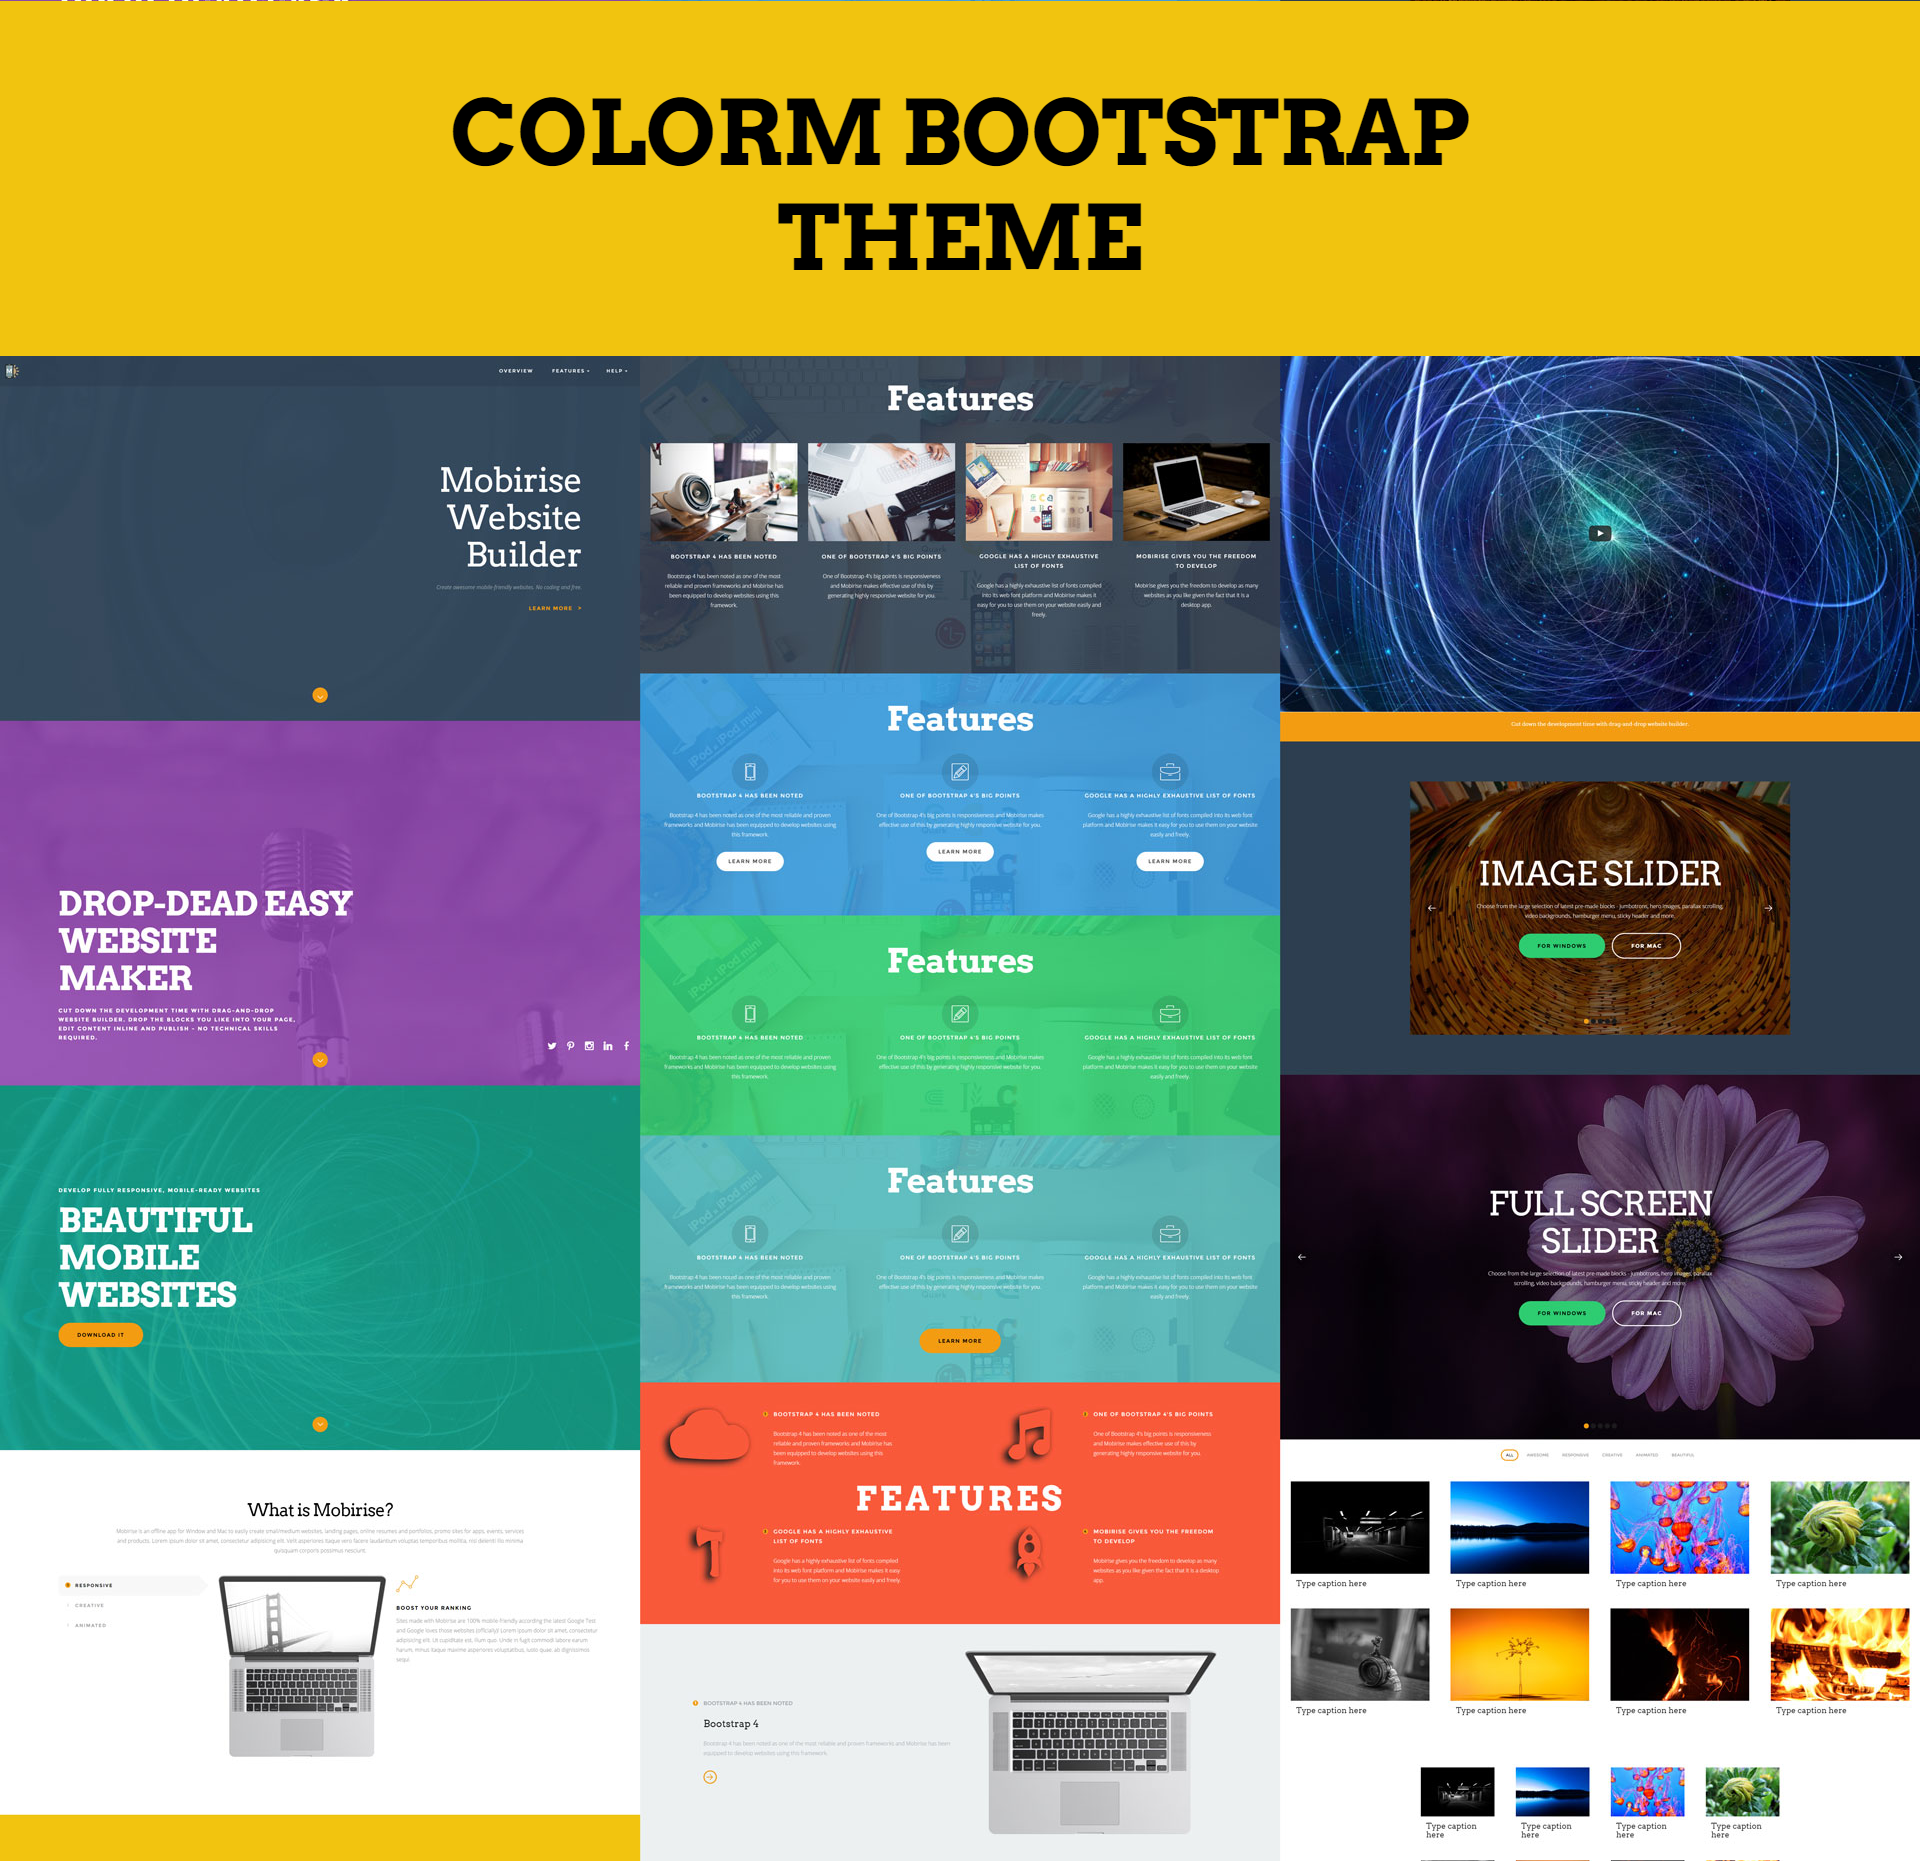 Free Download Bootstrap ColorM Templates